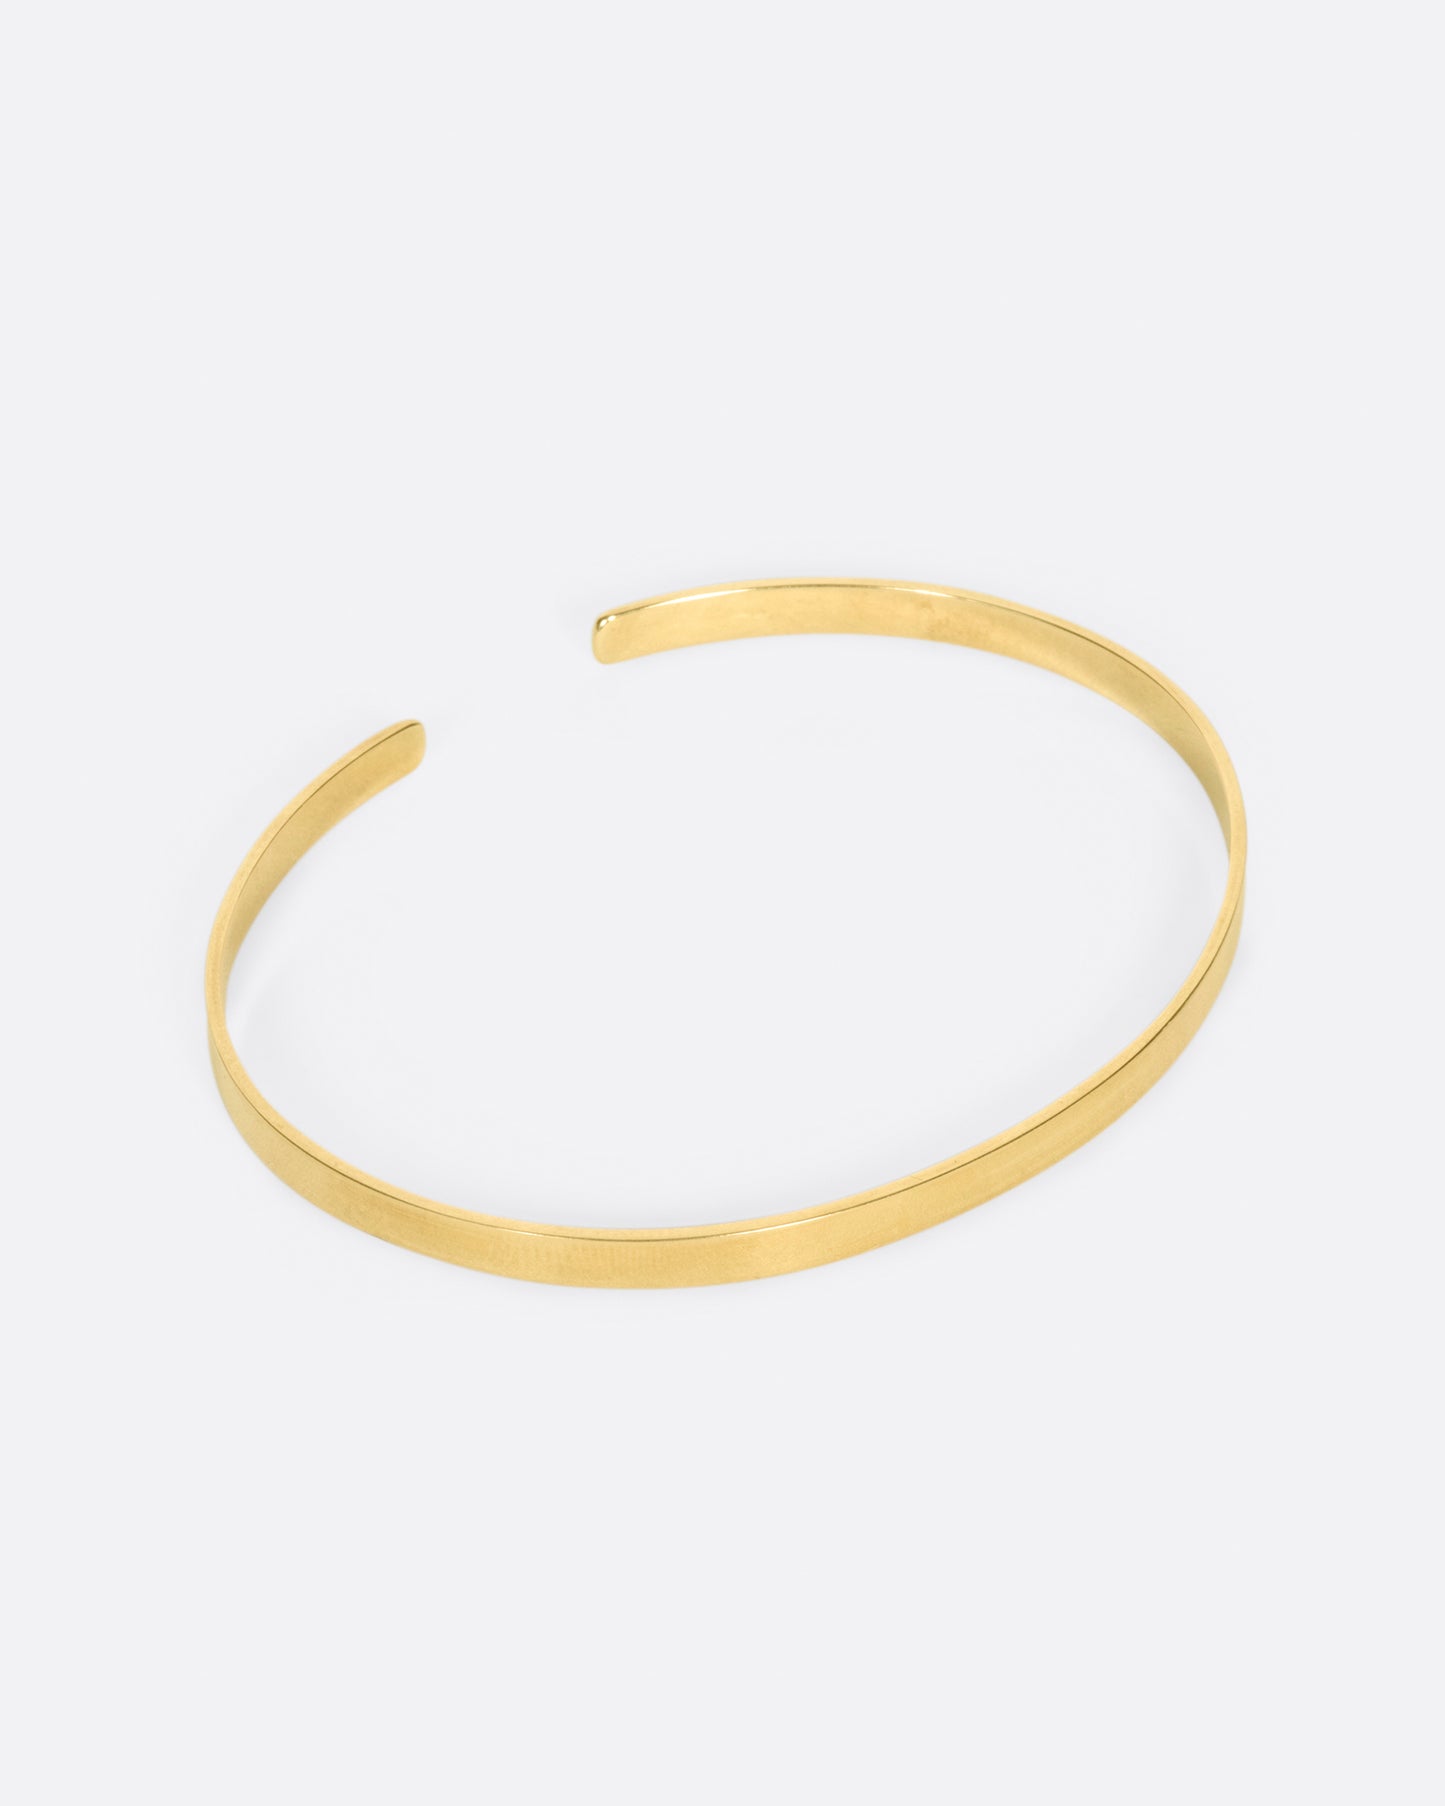 A flat ribbon of gold that looks like a bangle if you wear it face down, but still has all of the flexibility of a cuff.